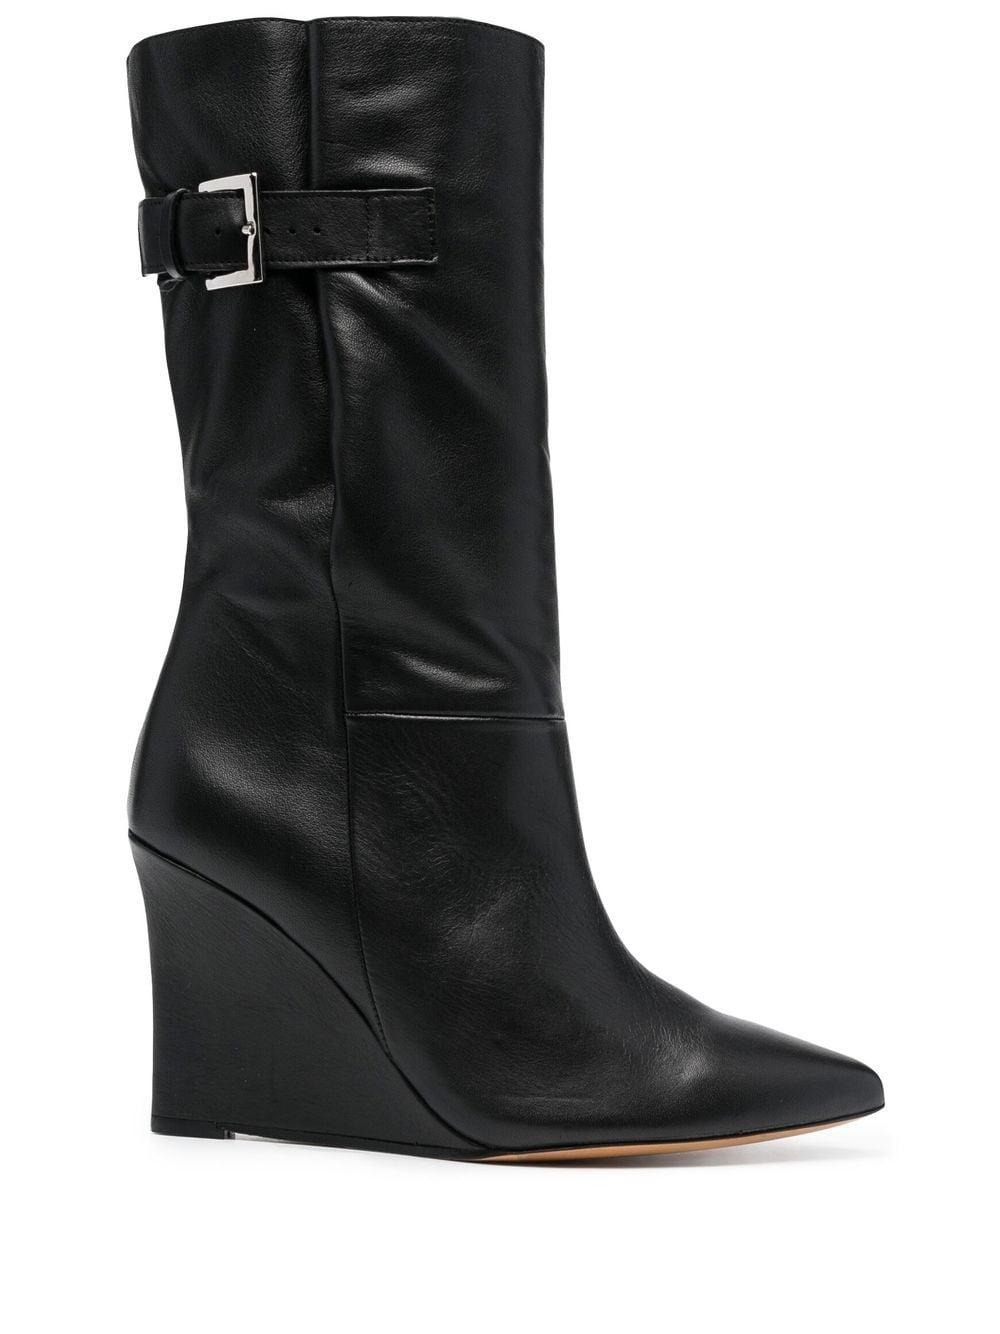 IRO Simba Leather Wedge Boots in Black | Lyst